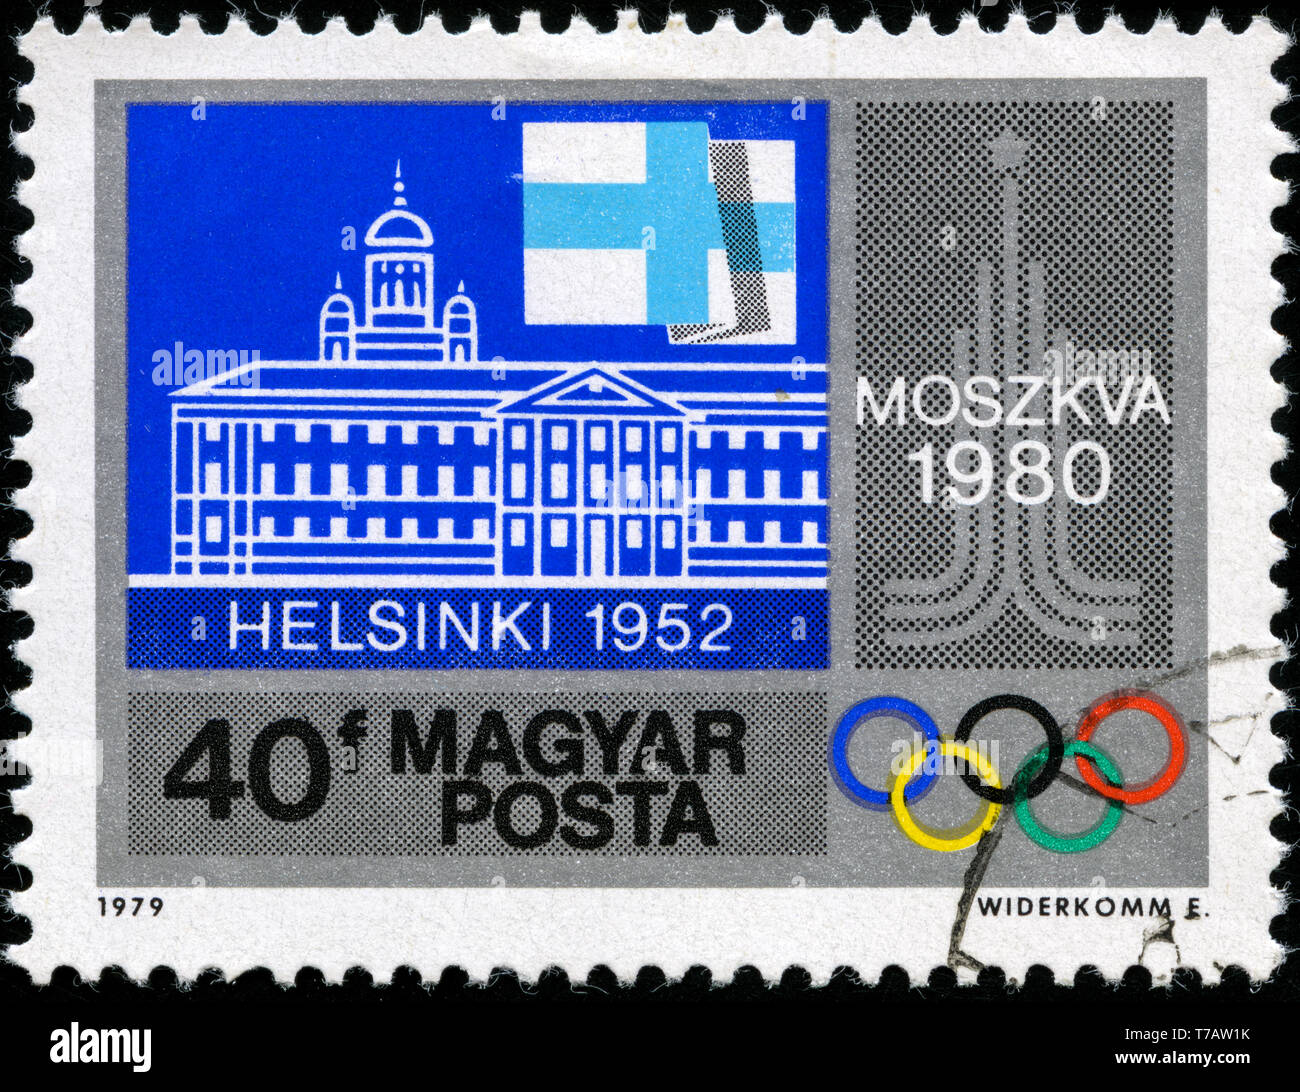 Postage stamp from Hungary in the Summer Olympic Games, 1980 Moscow (1) series issued in 1979 Stock Photo